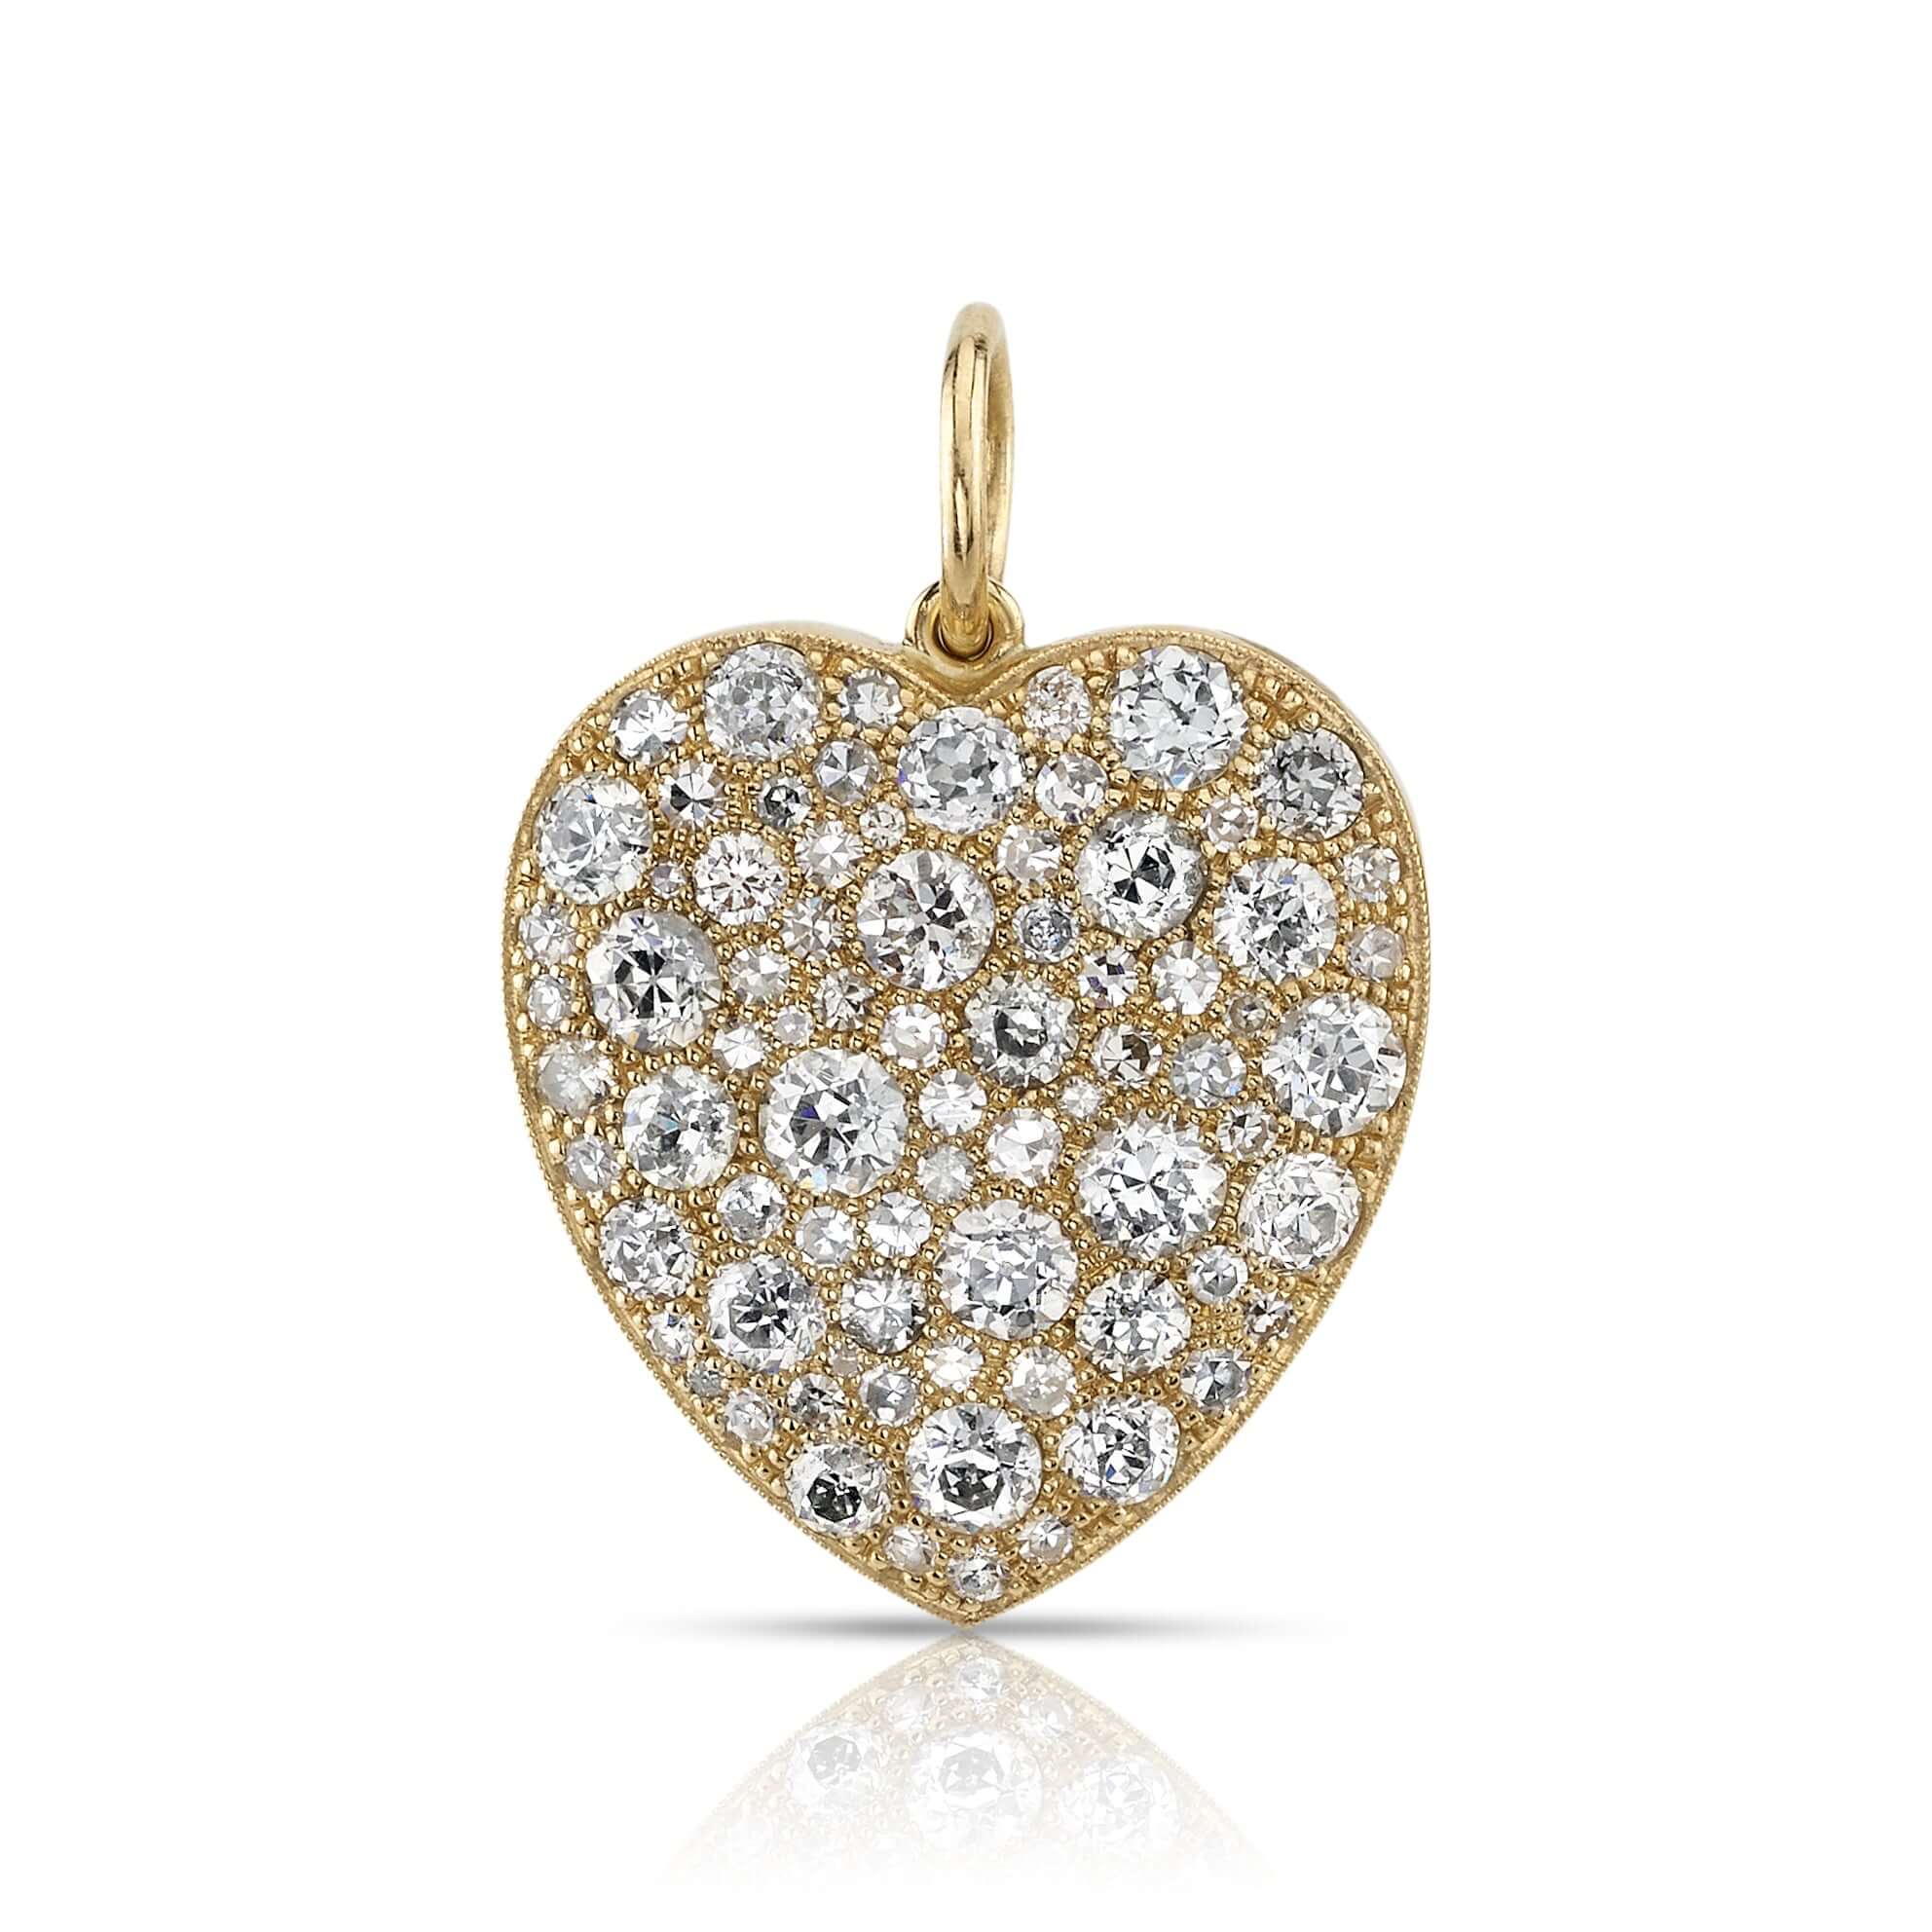 SINGLE STONE LARGE COBBLESTONE HEART PENDANT featuring Approximately 4.00ctw varying old cut and round brilliant cut diamonds set in a handcrafted 18K yellow gold heart pendant. Charm measures 22mm x 23mm. Price does not include chain. *Cobblestone patter